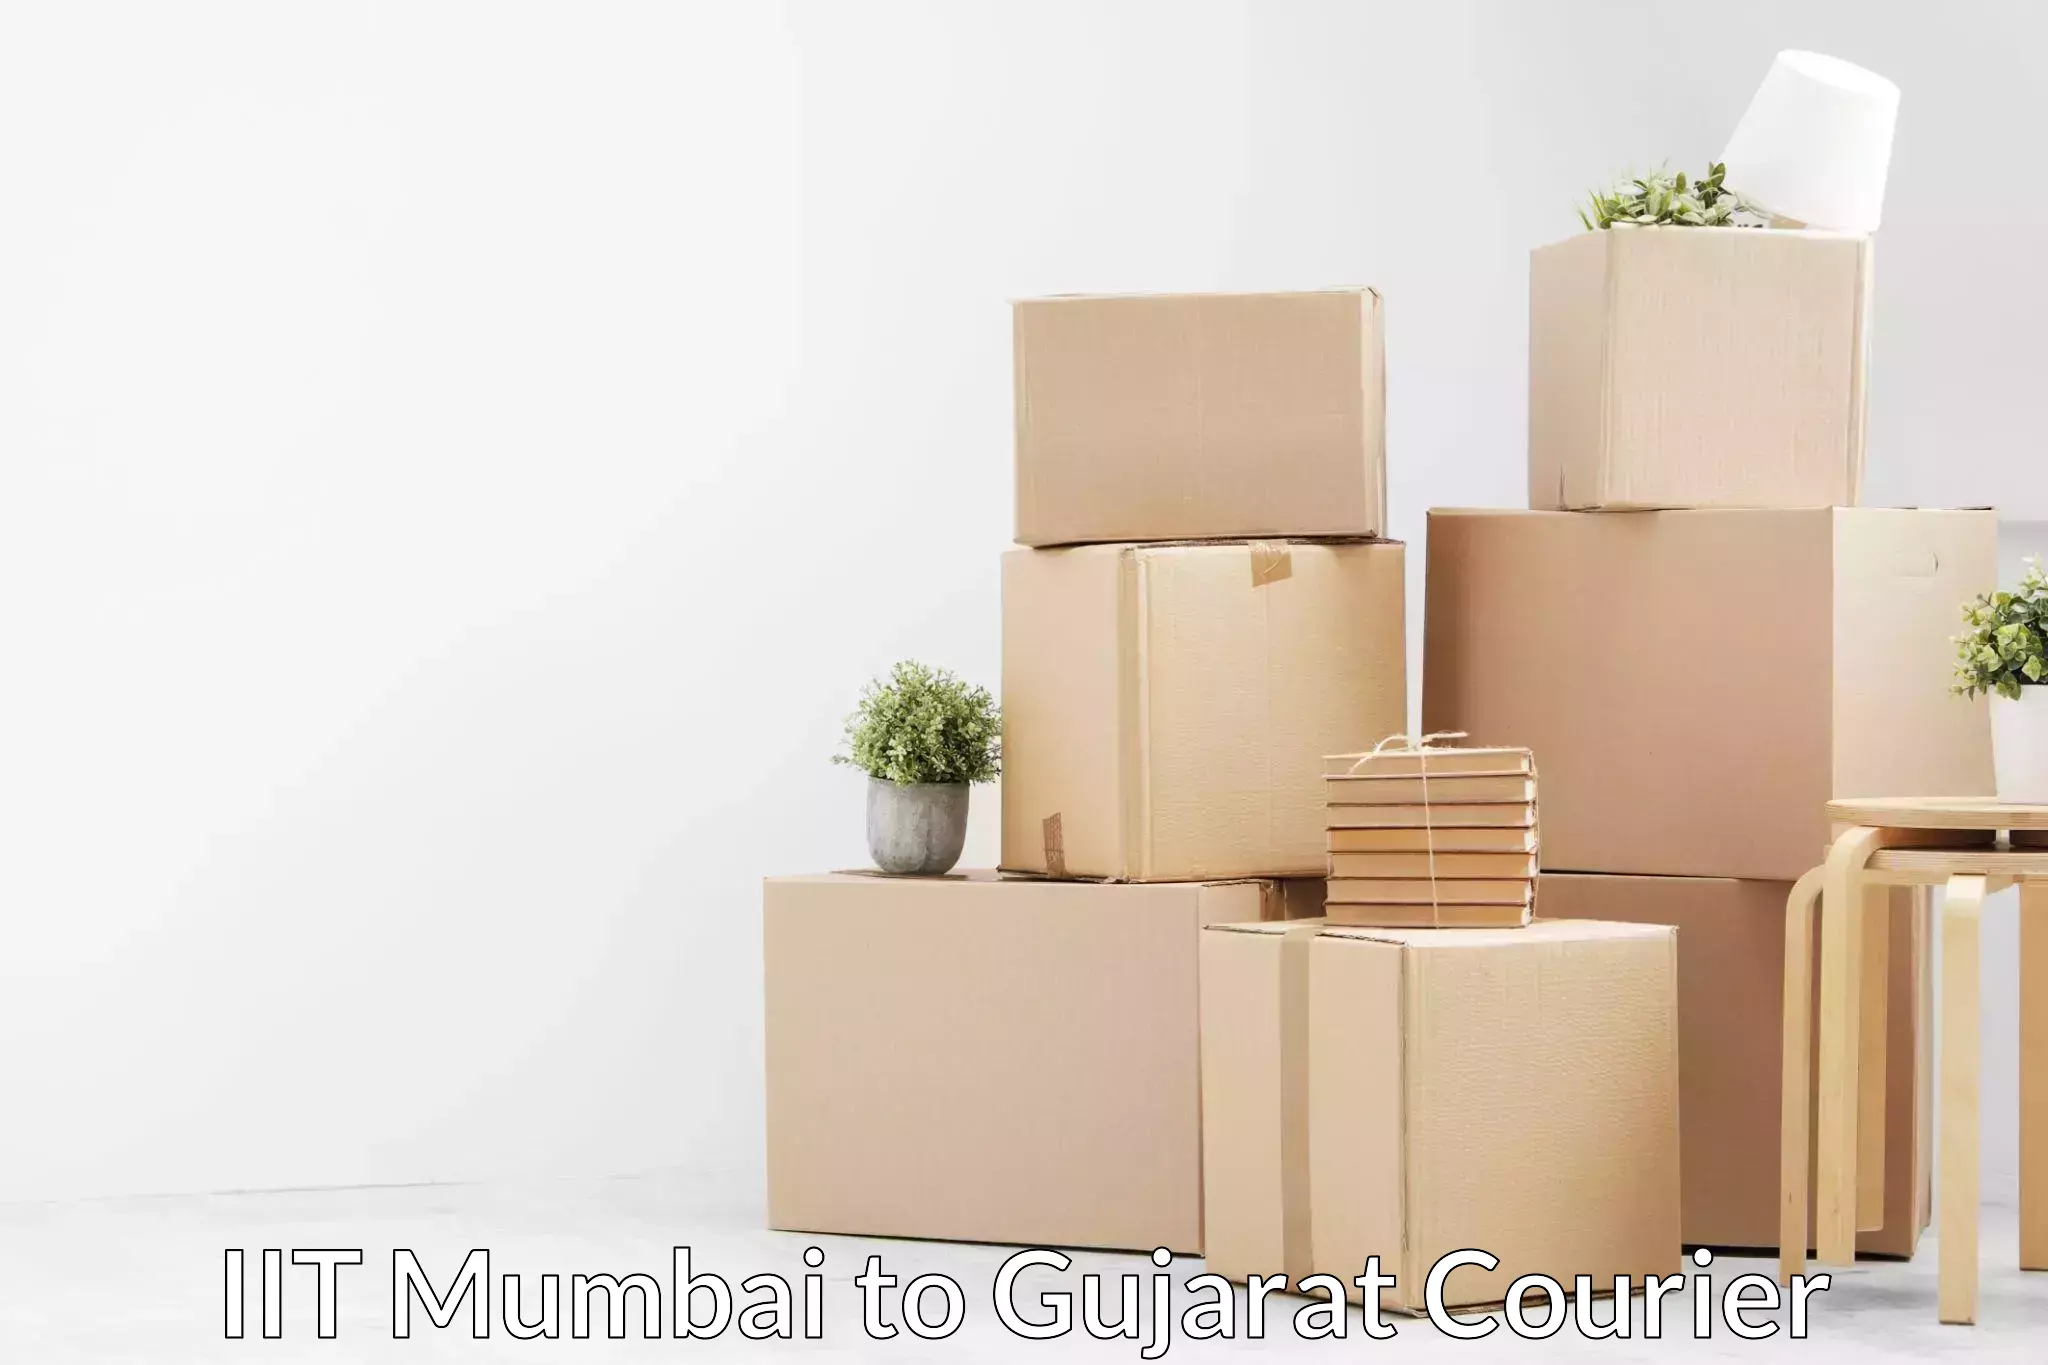 Home relocation experts in IIT Mumbai to Gujarat